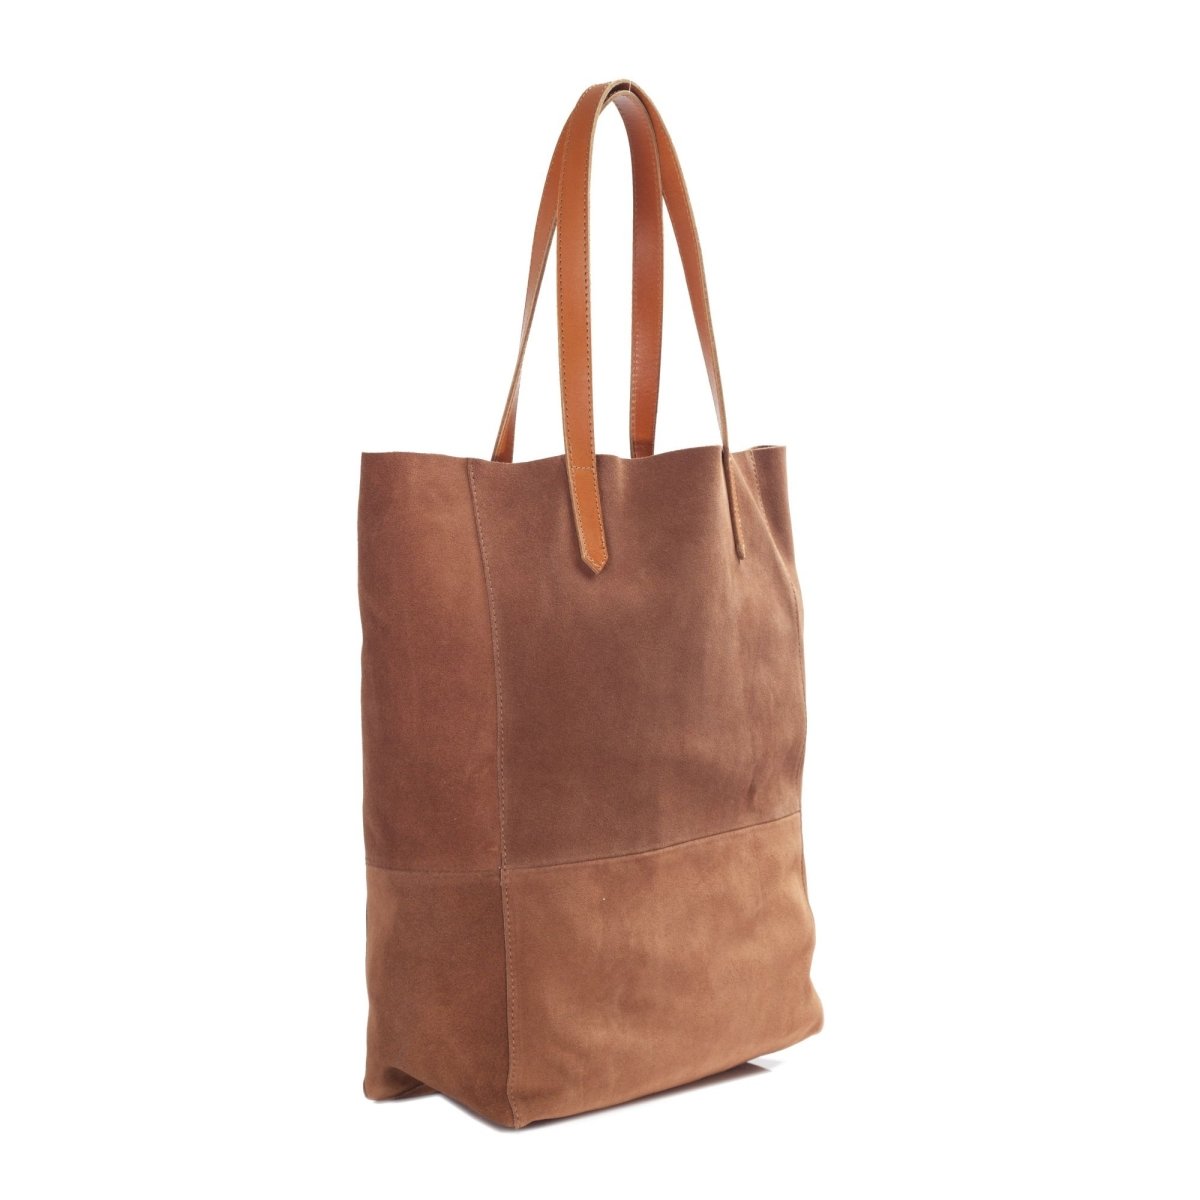 Shabby Suede Leather Tote Handbag - Ozzell London